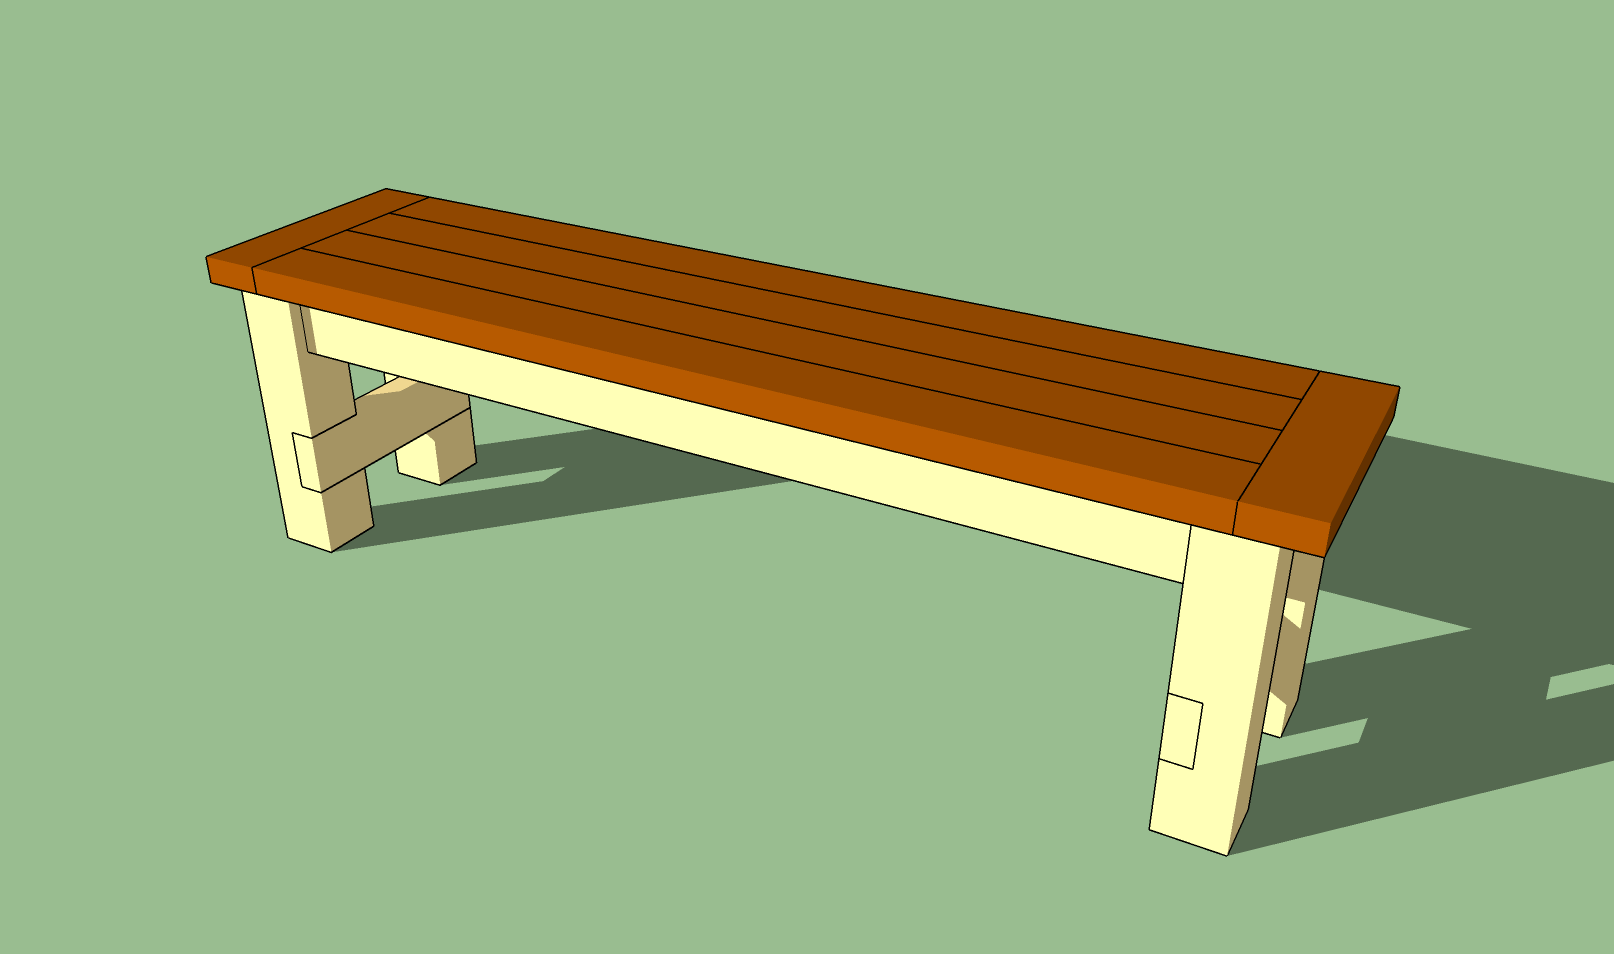 Choice Outdoor bench plans videos ~ made project by wood